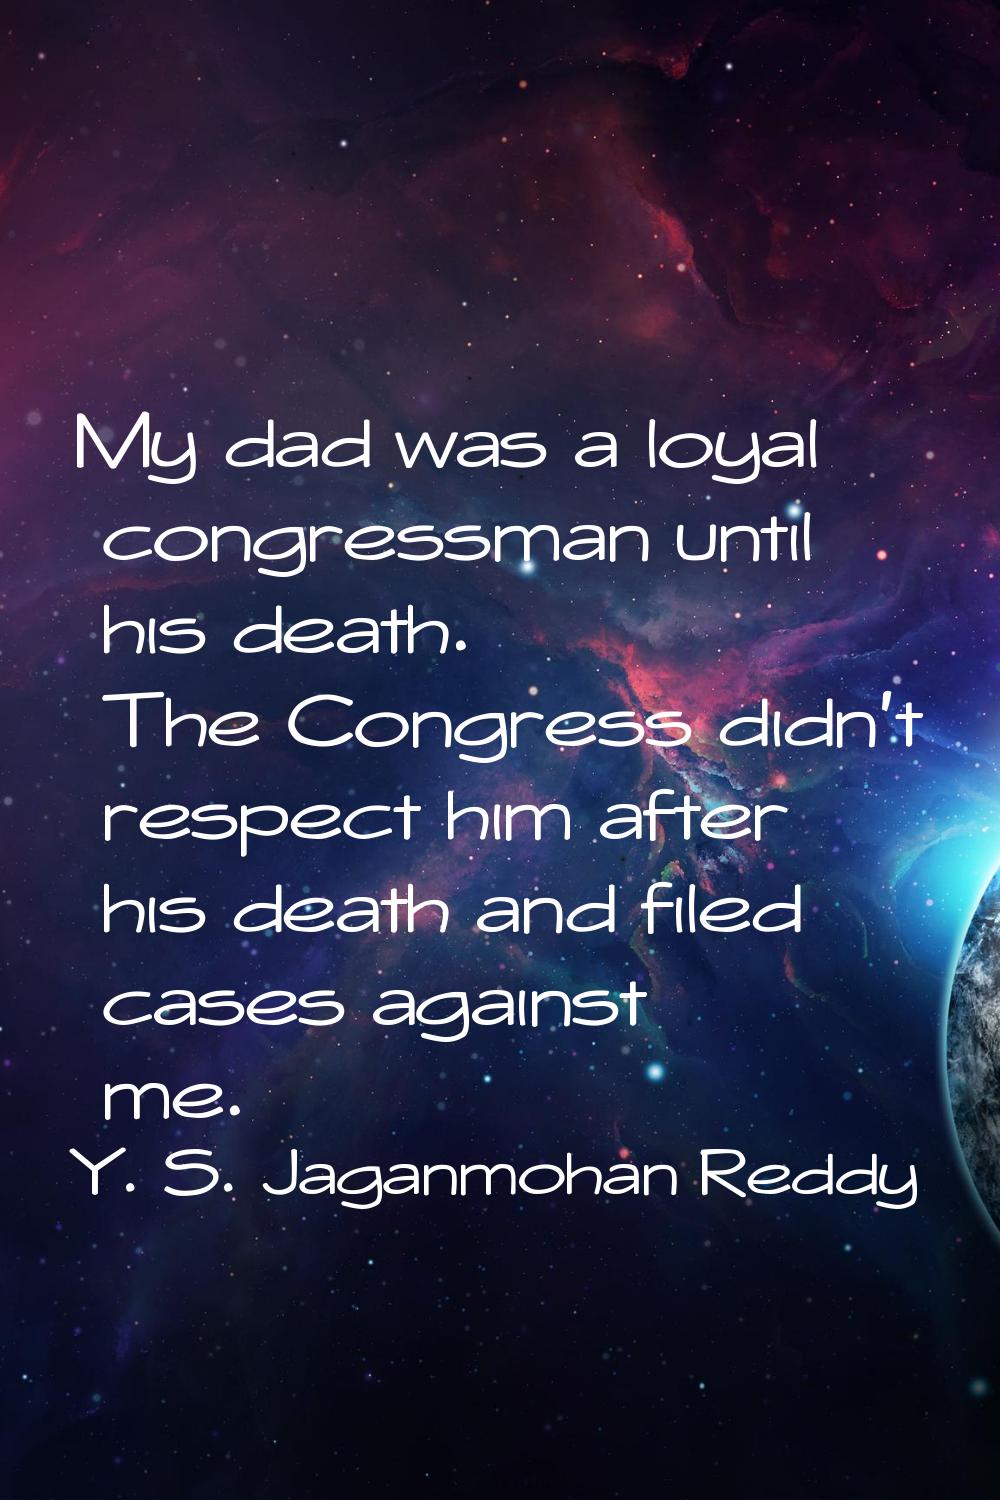 My dad was a loyal congressman until his death. The Congress didn't respect him after his death and